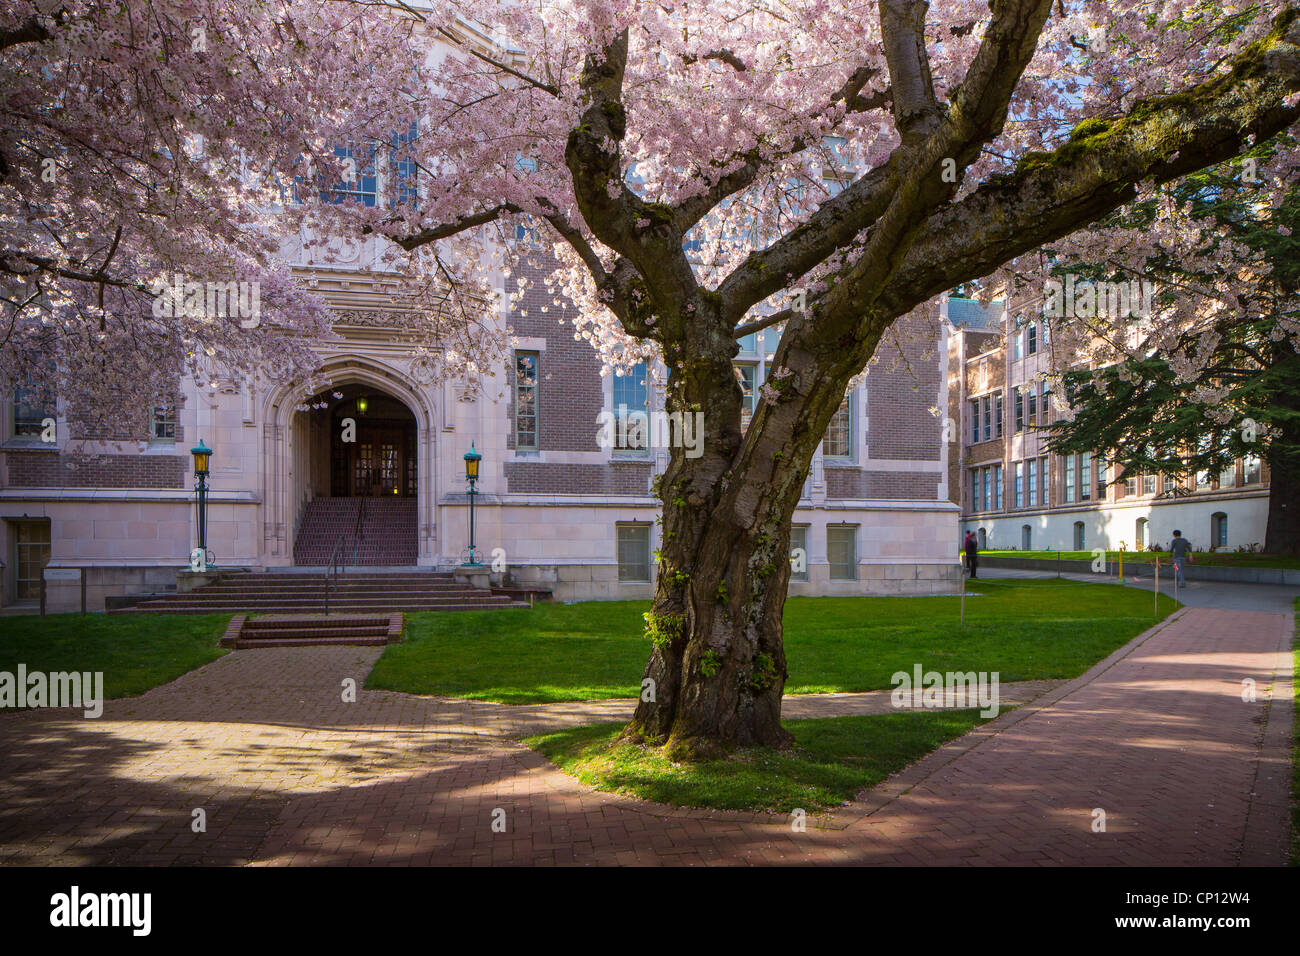 Cherry trees in bloom at the University of Washington campus in Seattle, Washington Stock Photo